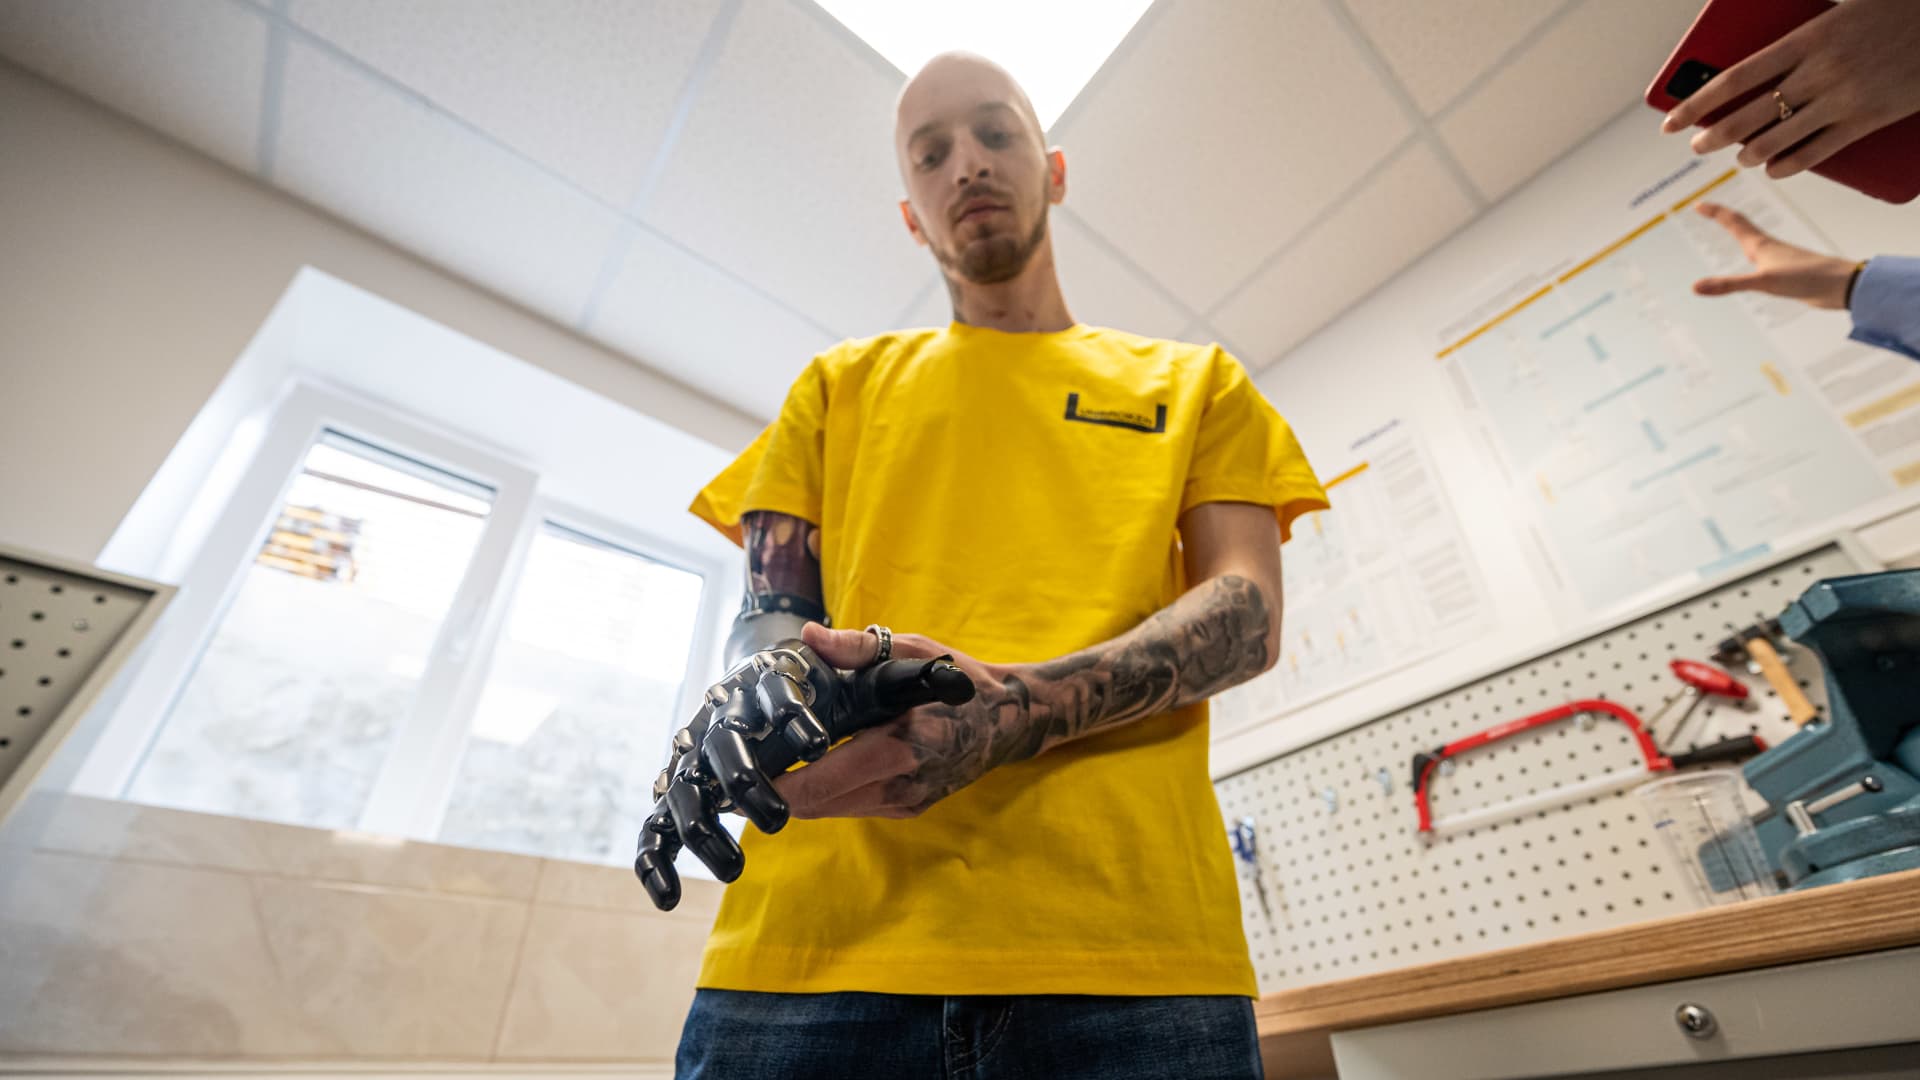 A man with a bionic prosthetic hand shows how a prosthesis functions, holding a hammer in his prosthetic hand on March 23, 2023 in Lviv, Ukraine. 